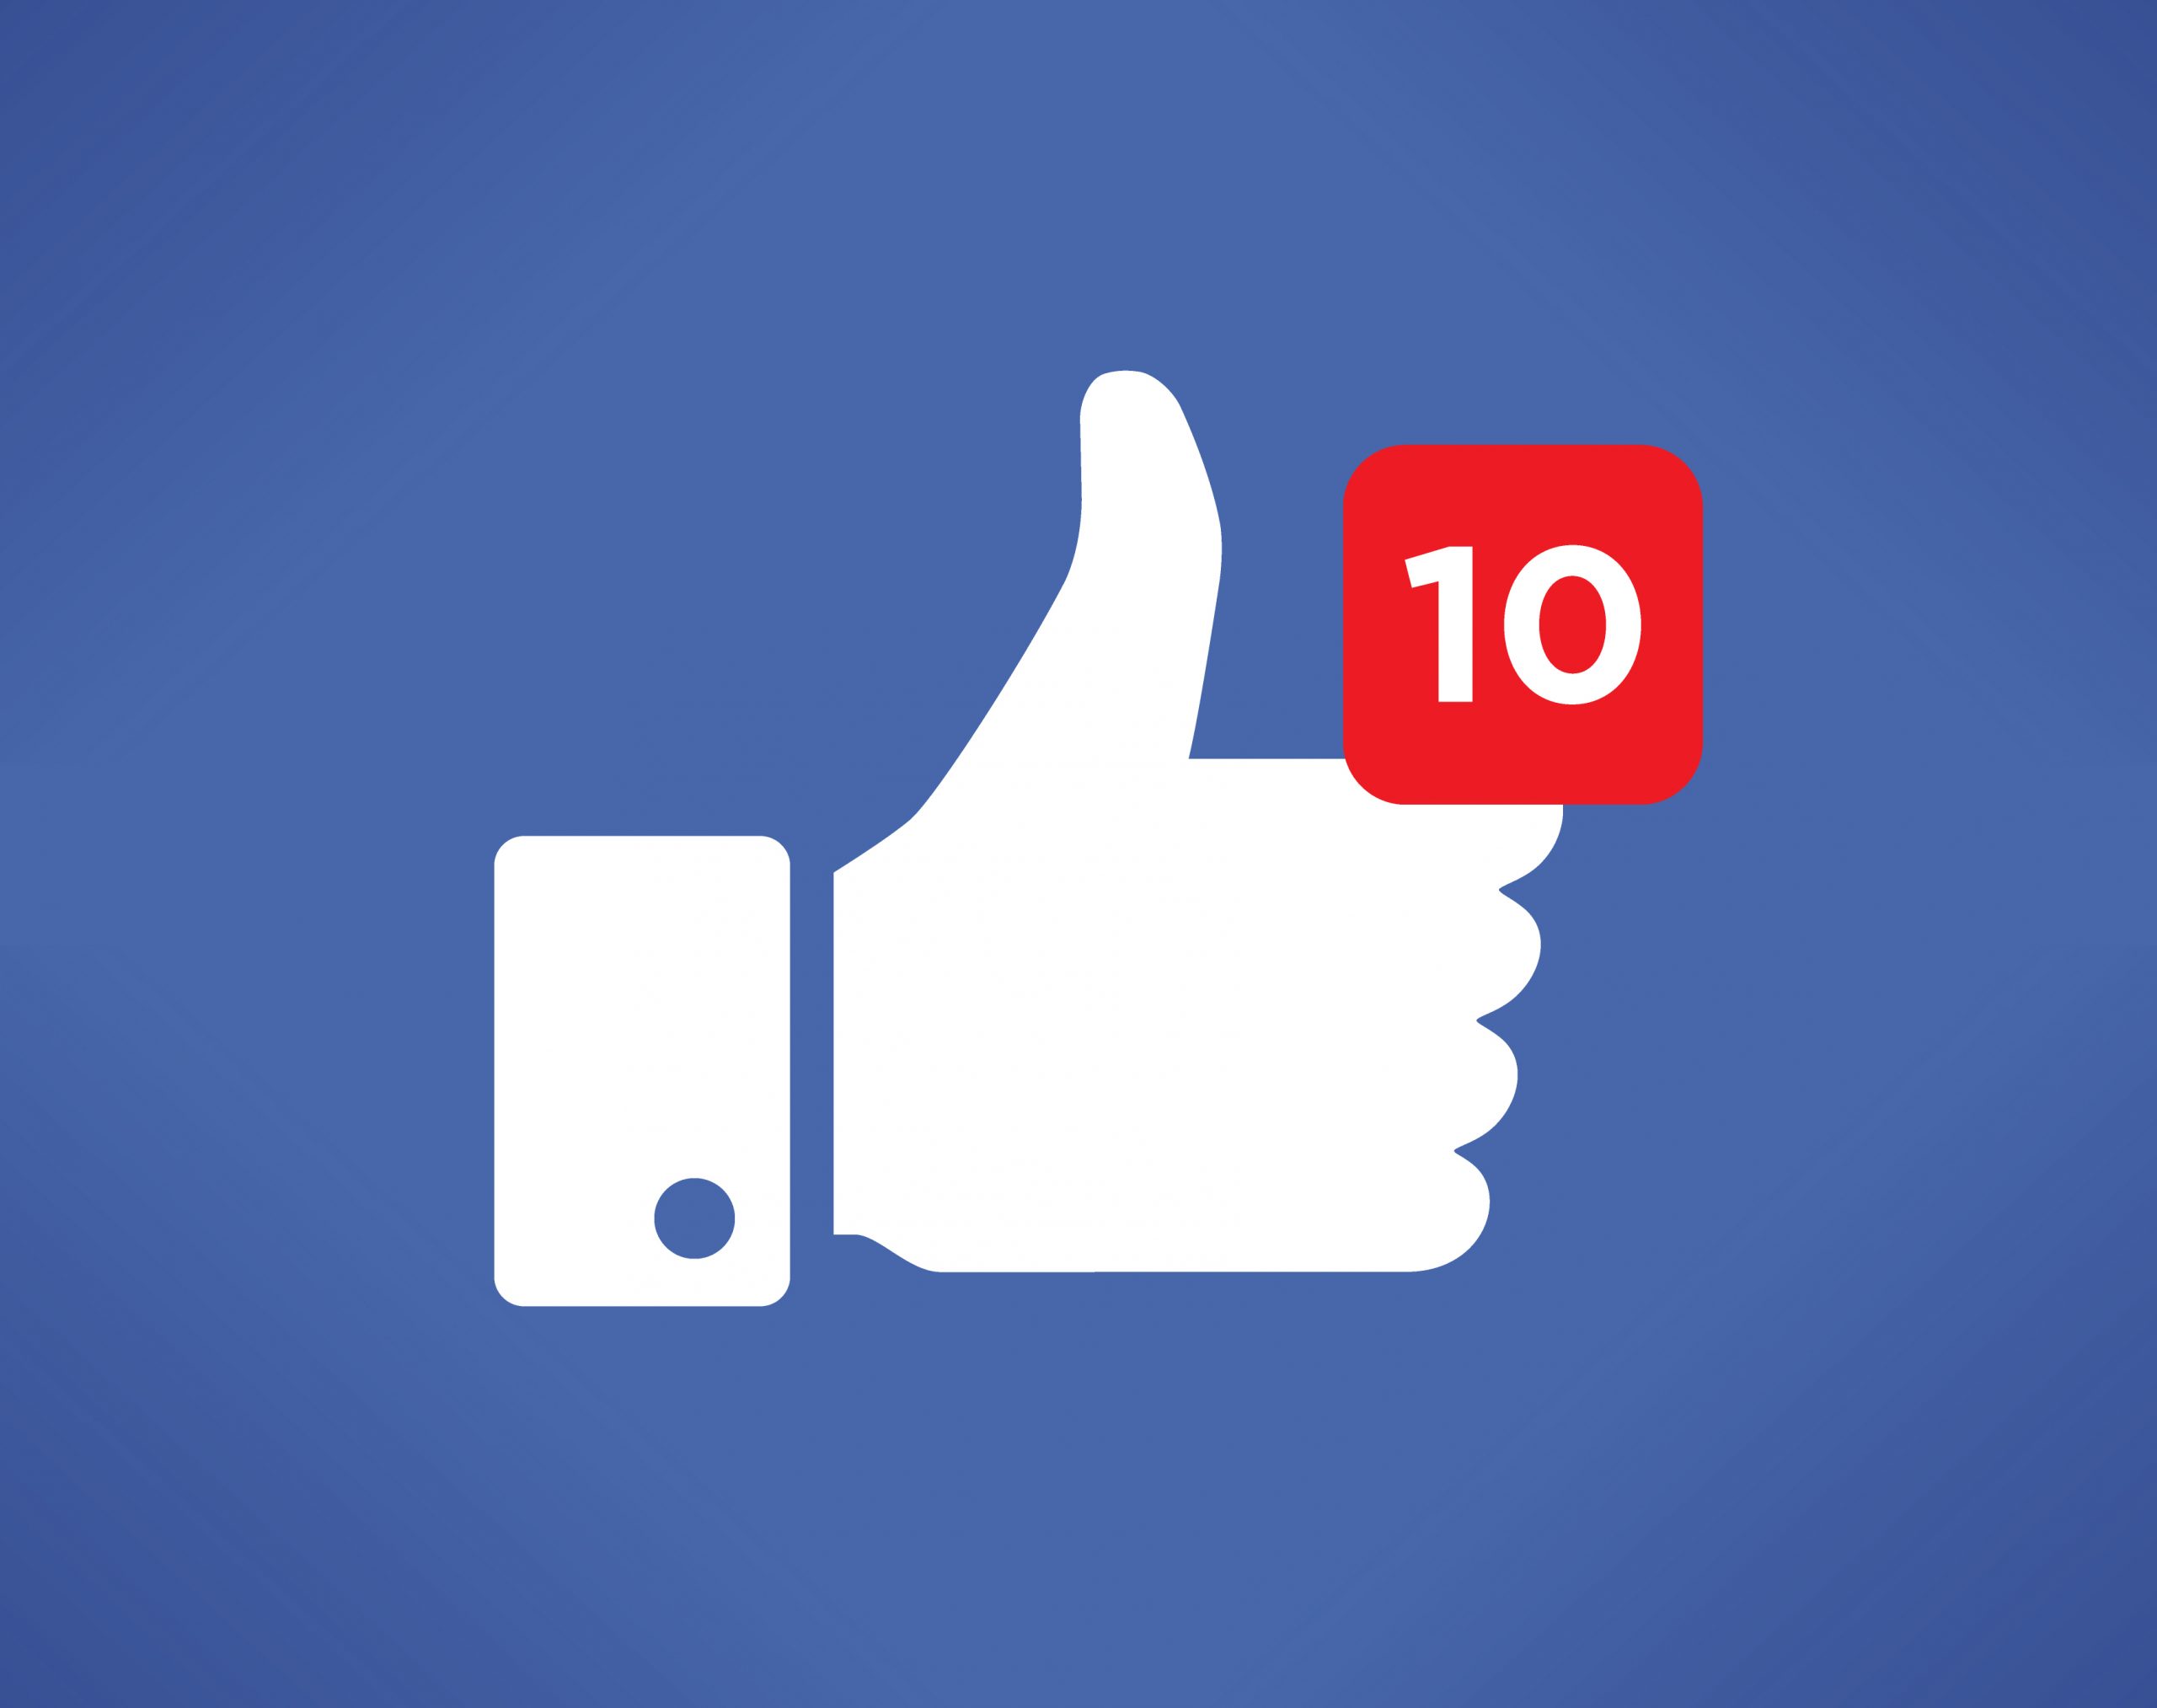 4 Question Posts to Boost Facebook Engagement